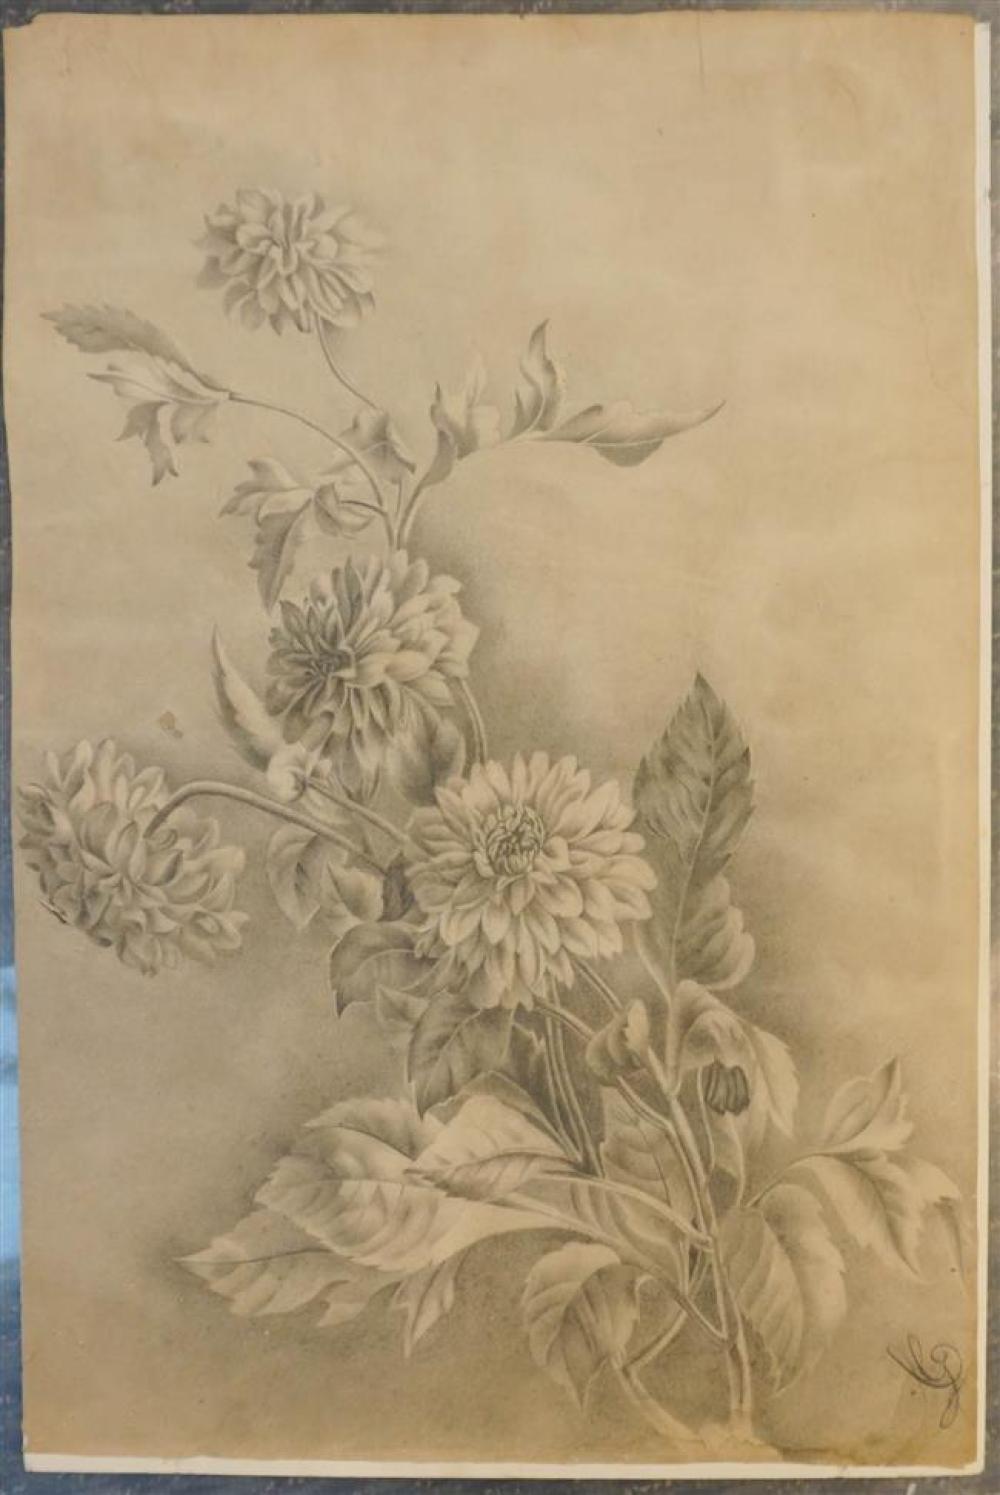 STILL LIFE OF FLOWERS, PENCIL AND